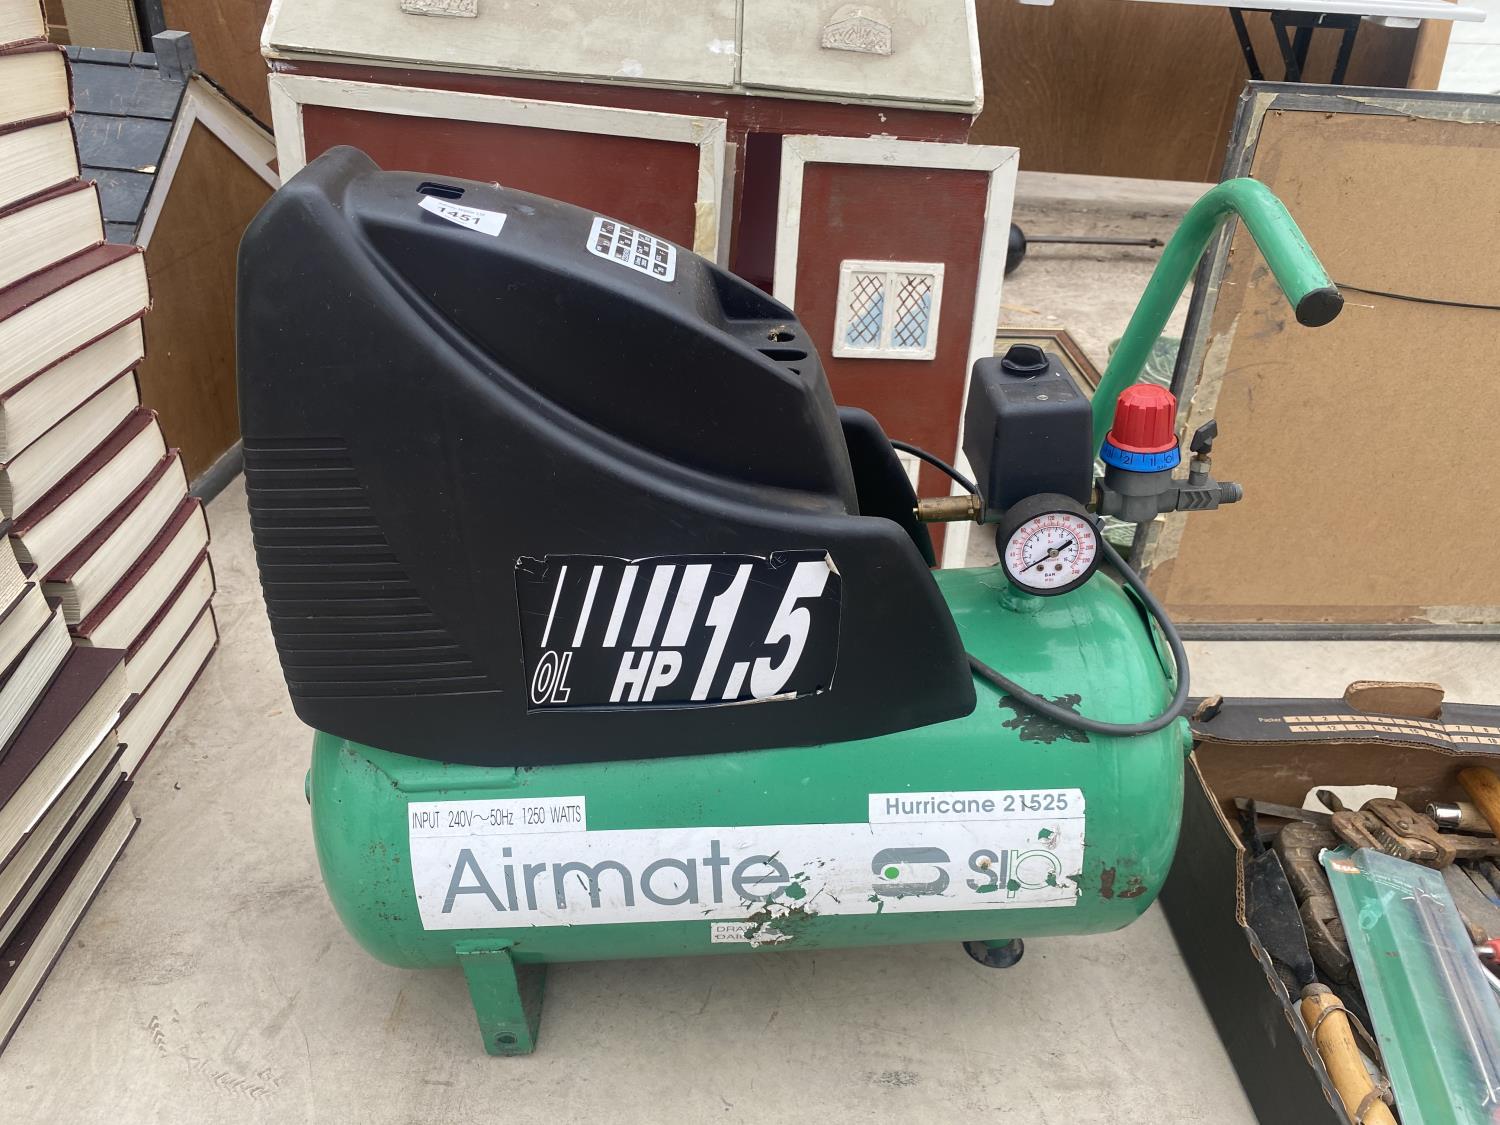 AN AIRMATE HURRICANE 21525 240V AIR COMPRESSOR BELIEVED IN WORKING ORDER BUT NO WARRANTY